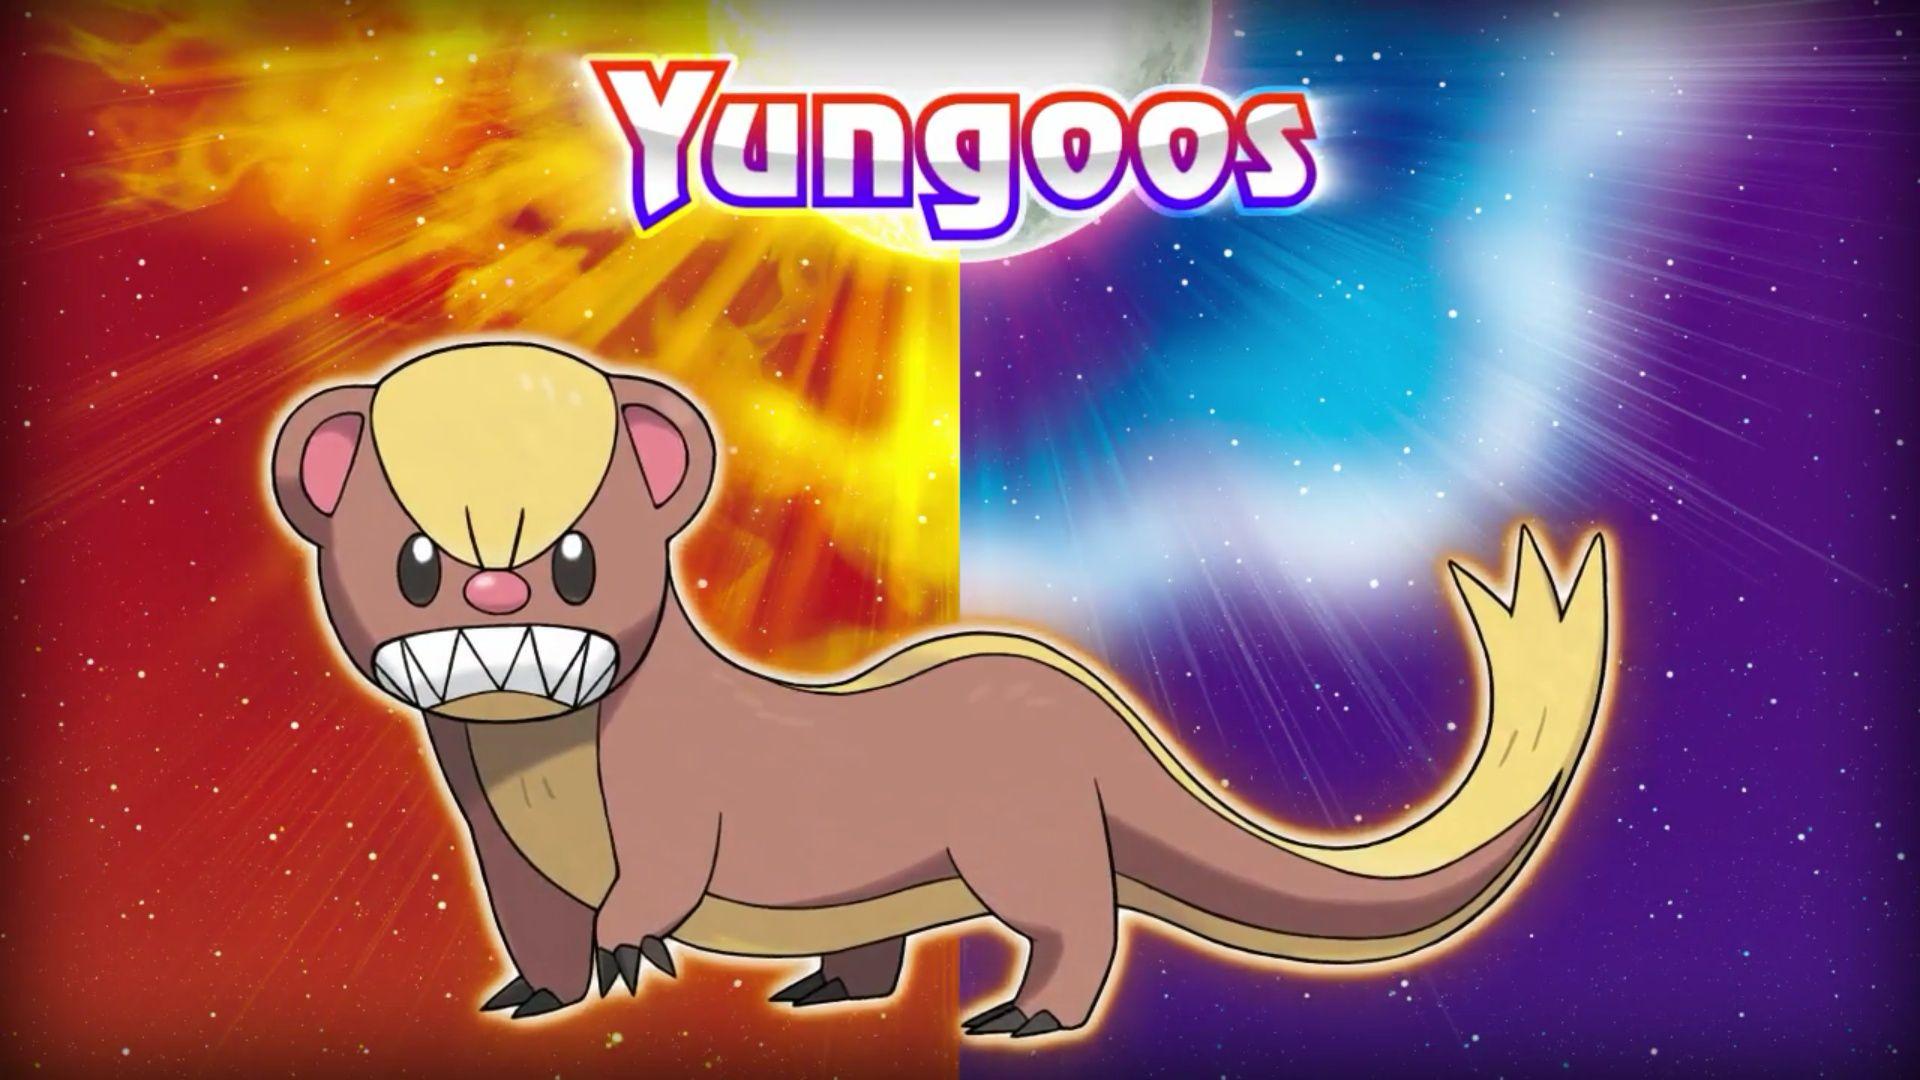 Yungoos Hd Wallpapers